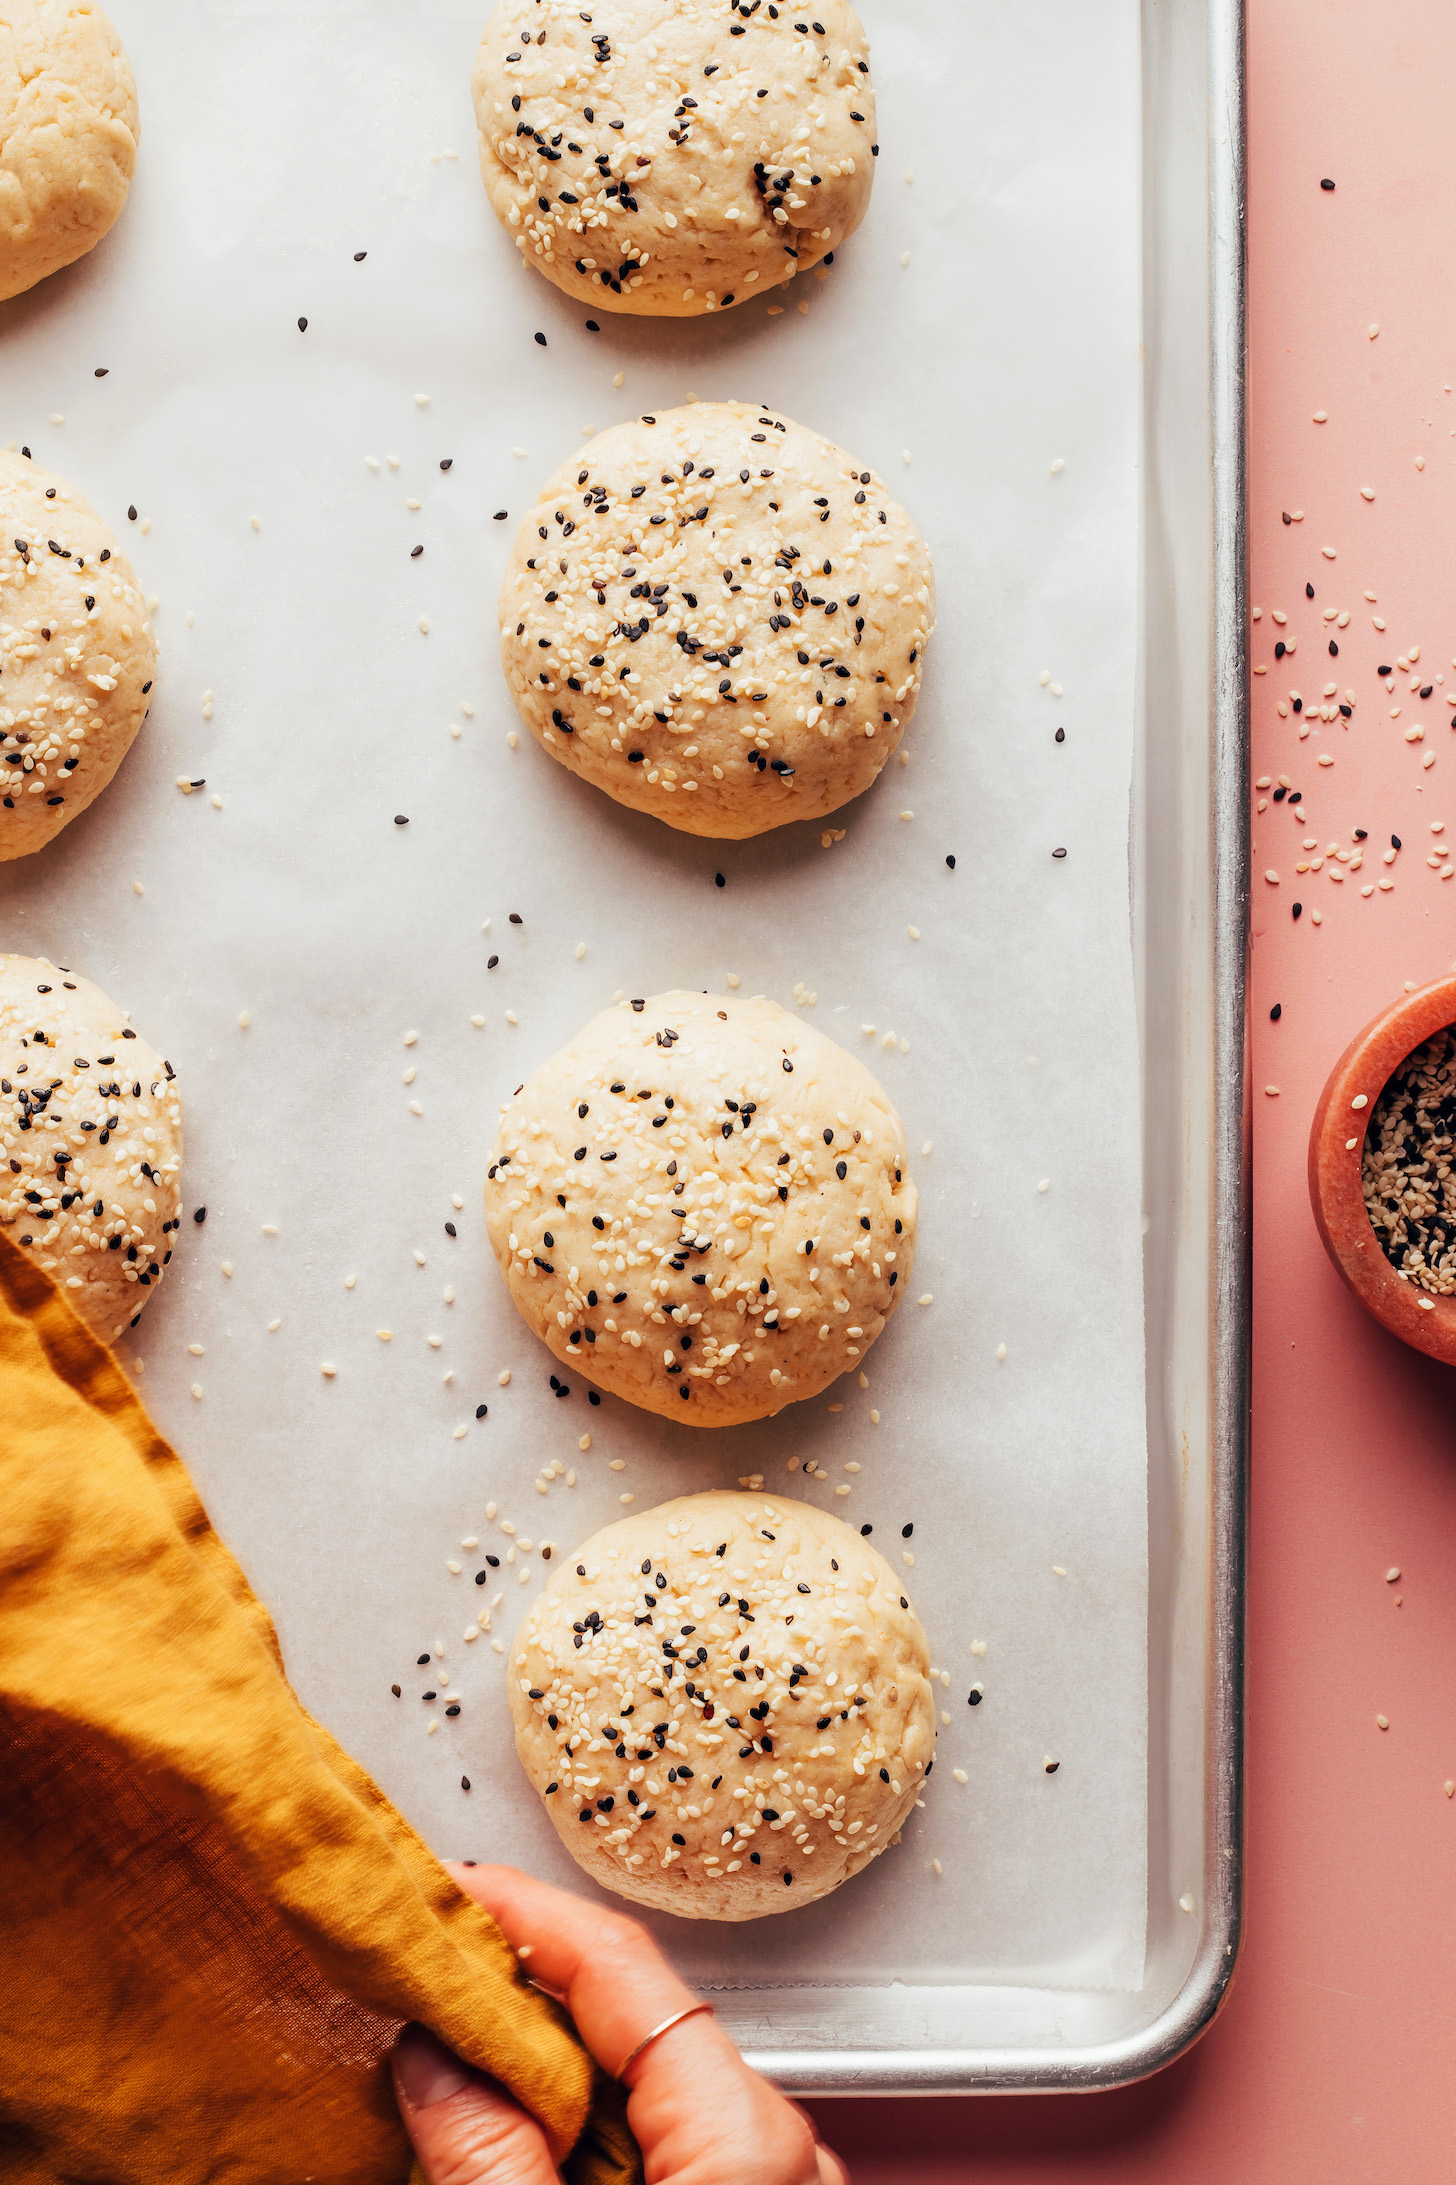 Baking sheet of unbaked hamburger buns topped with sesame seeds